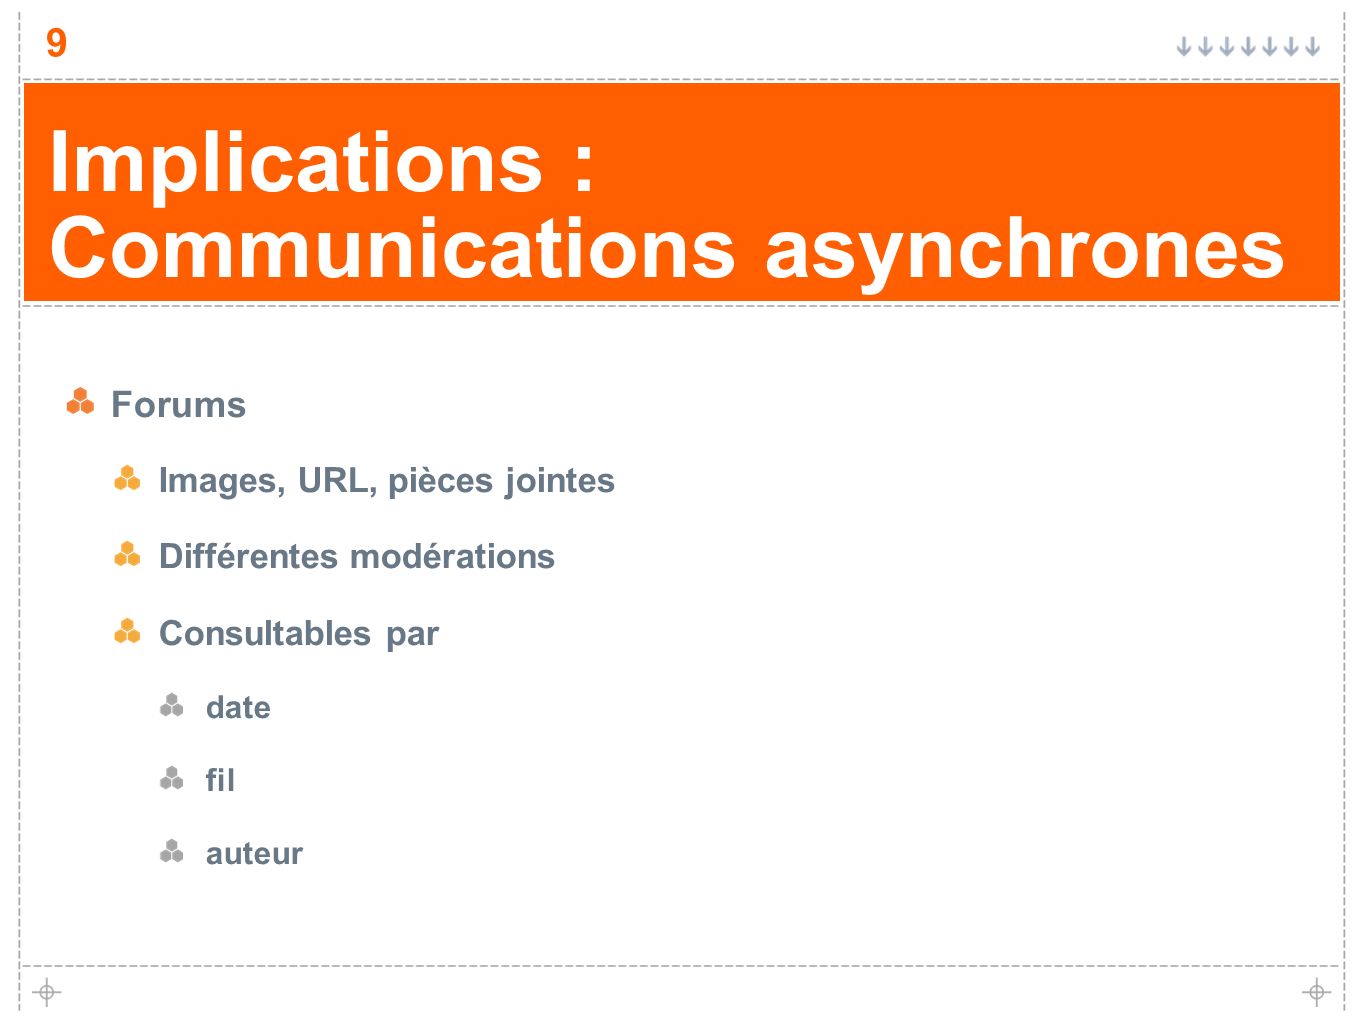 Implications : Communications asynchrones